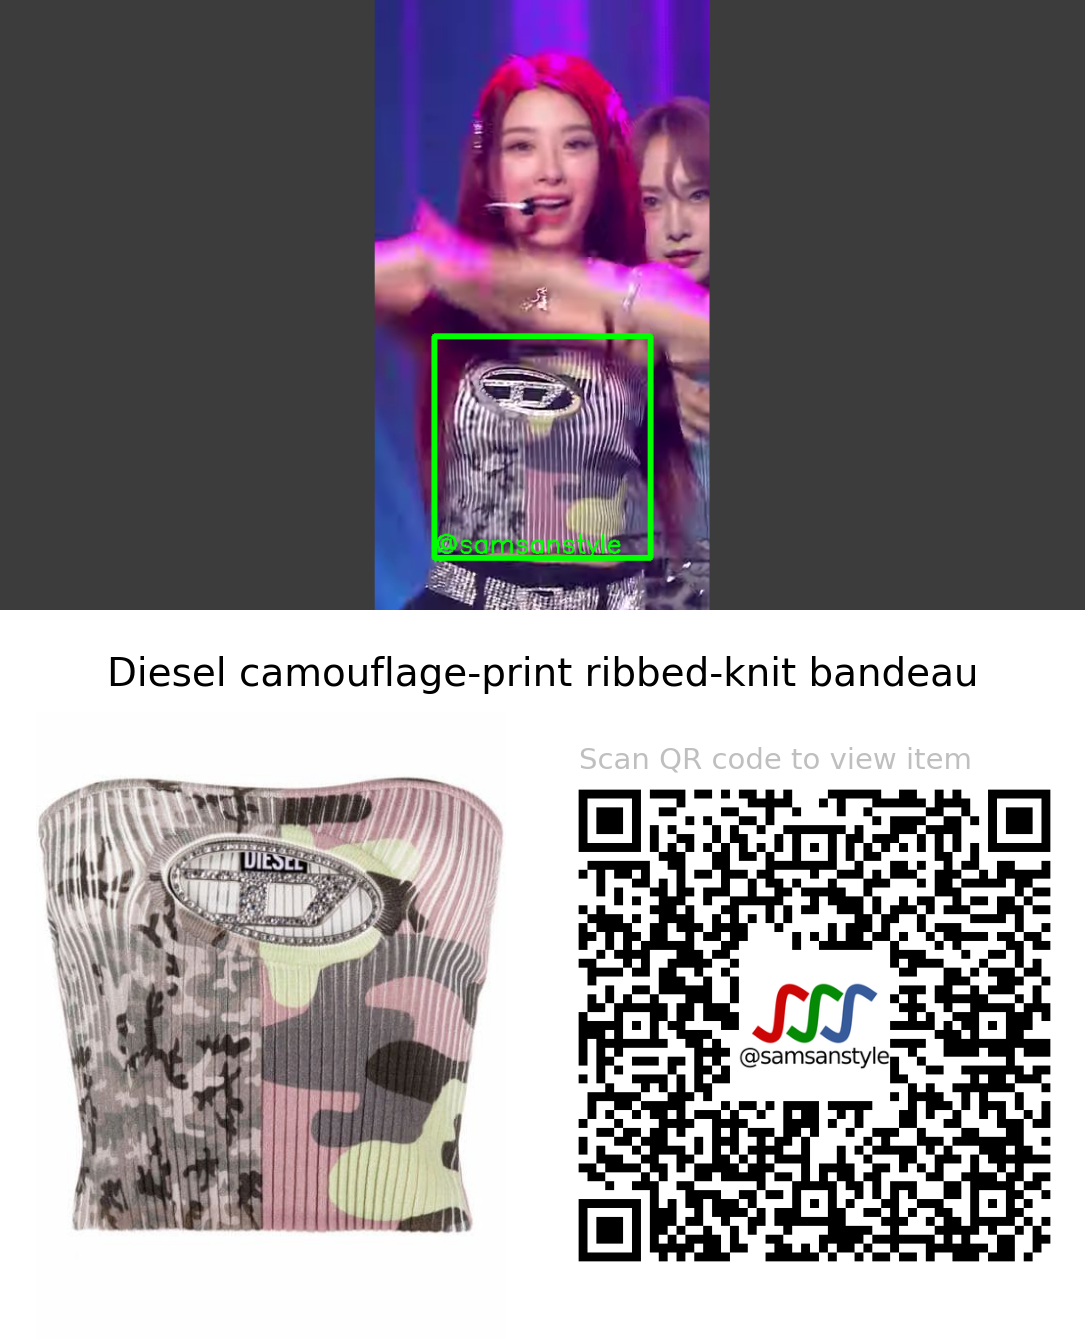 Rocket Punch Yunkyoung | FLASH MBC M Show Champion | Diesel camouflage-print ribbed-knit bandeau